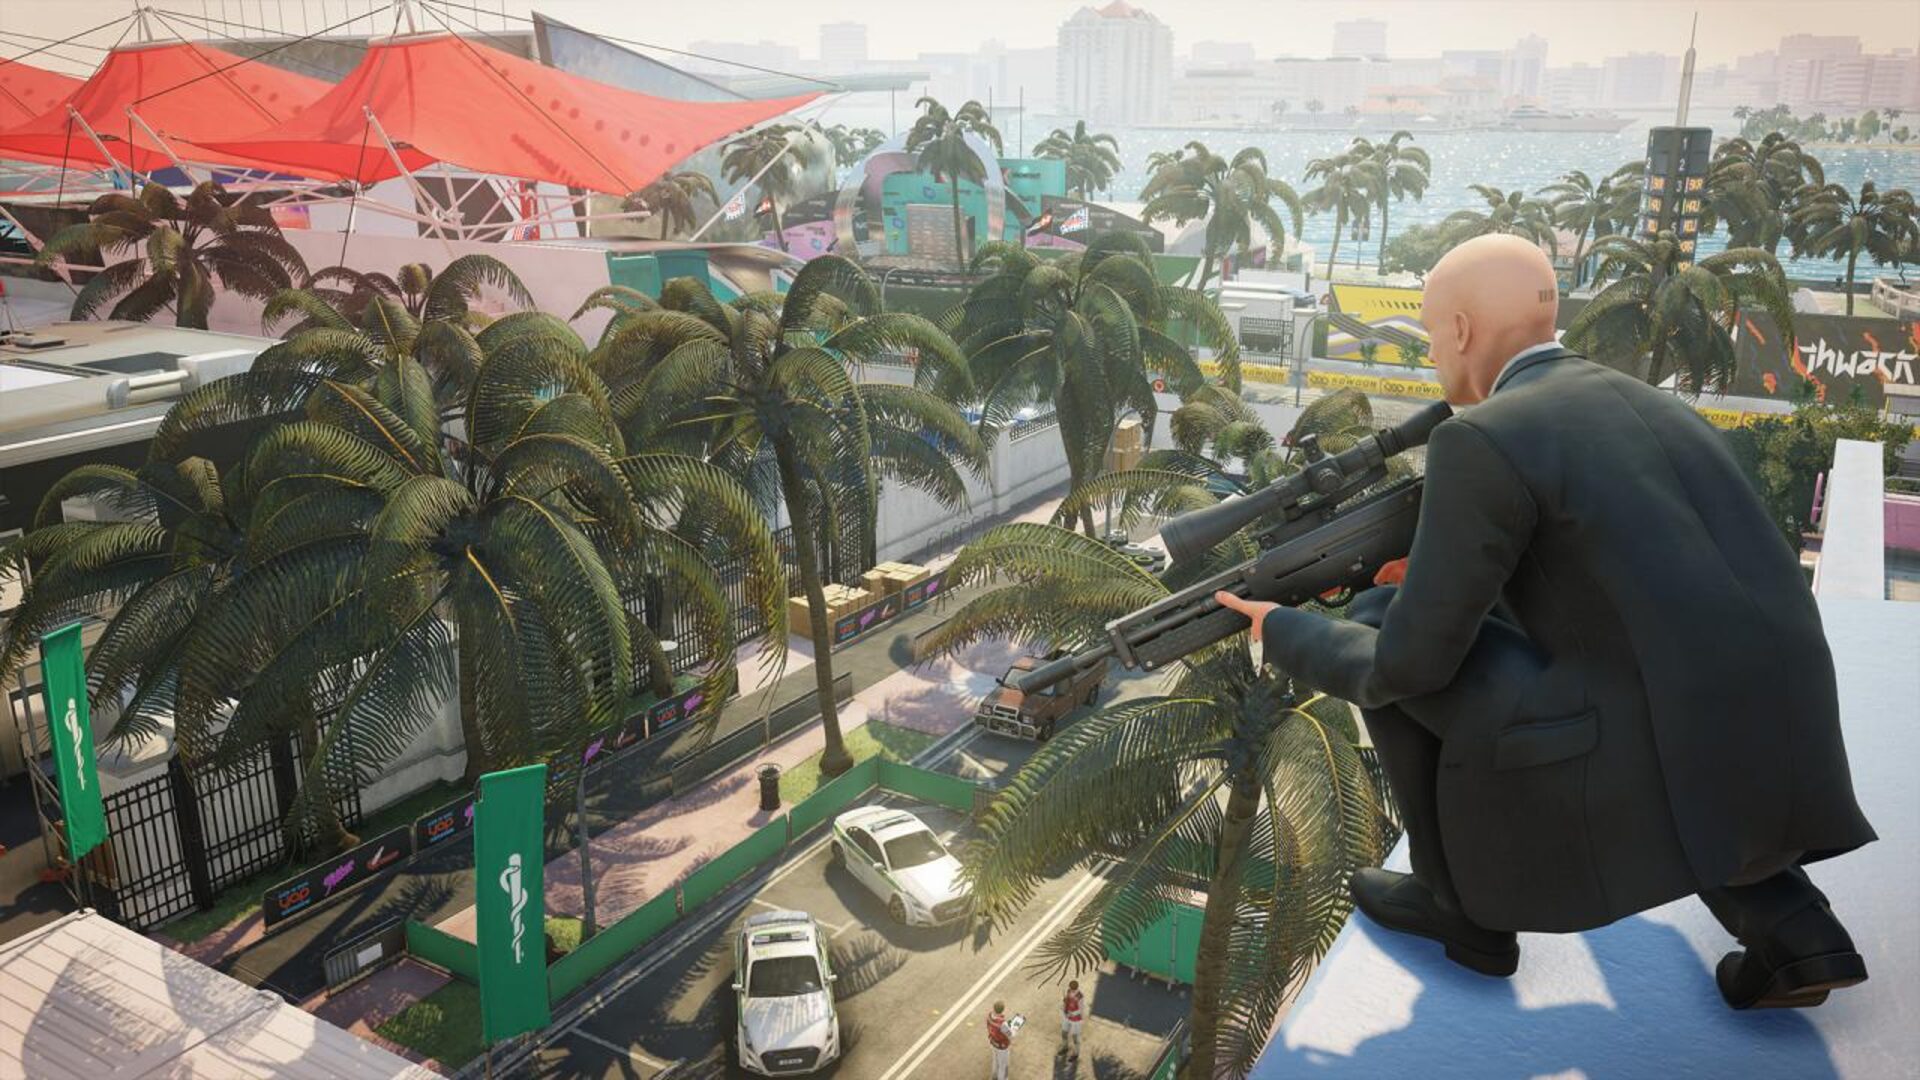 hitman with sniper on rooftop